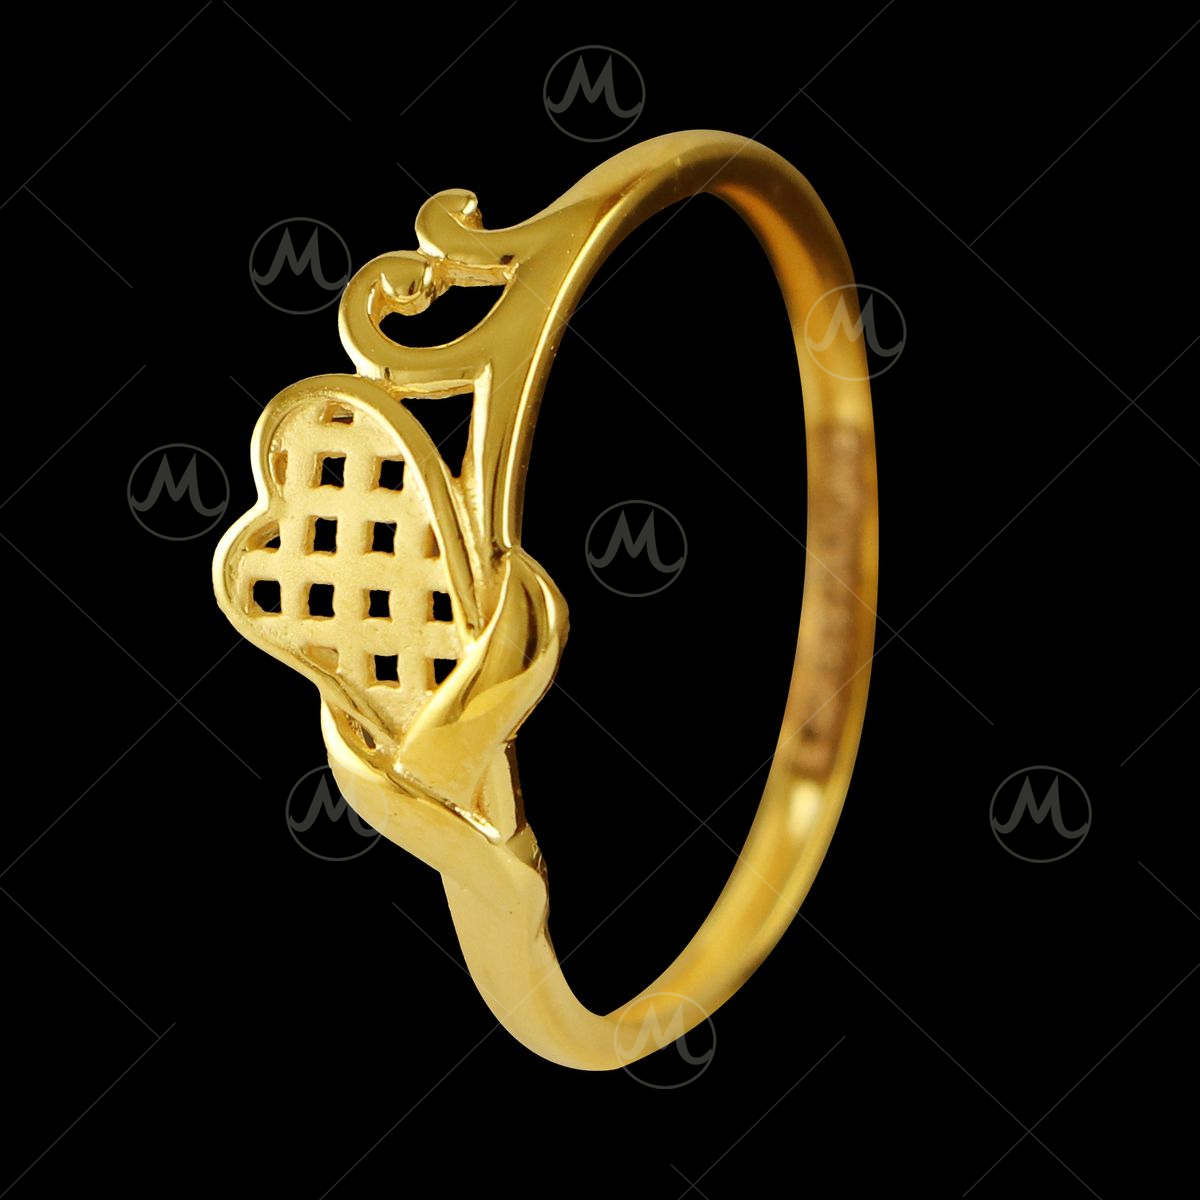 P.C. Chandra Jewellers 22KT (916) Yellow Gold BIS Hallmark Online Exclusive  Ring for Women - 1.15 Grams : Amazon.in: Fashion